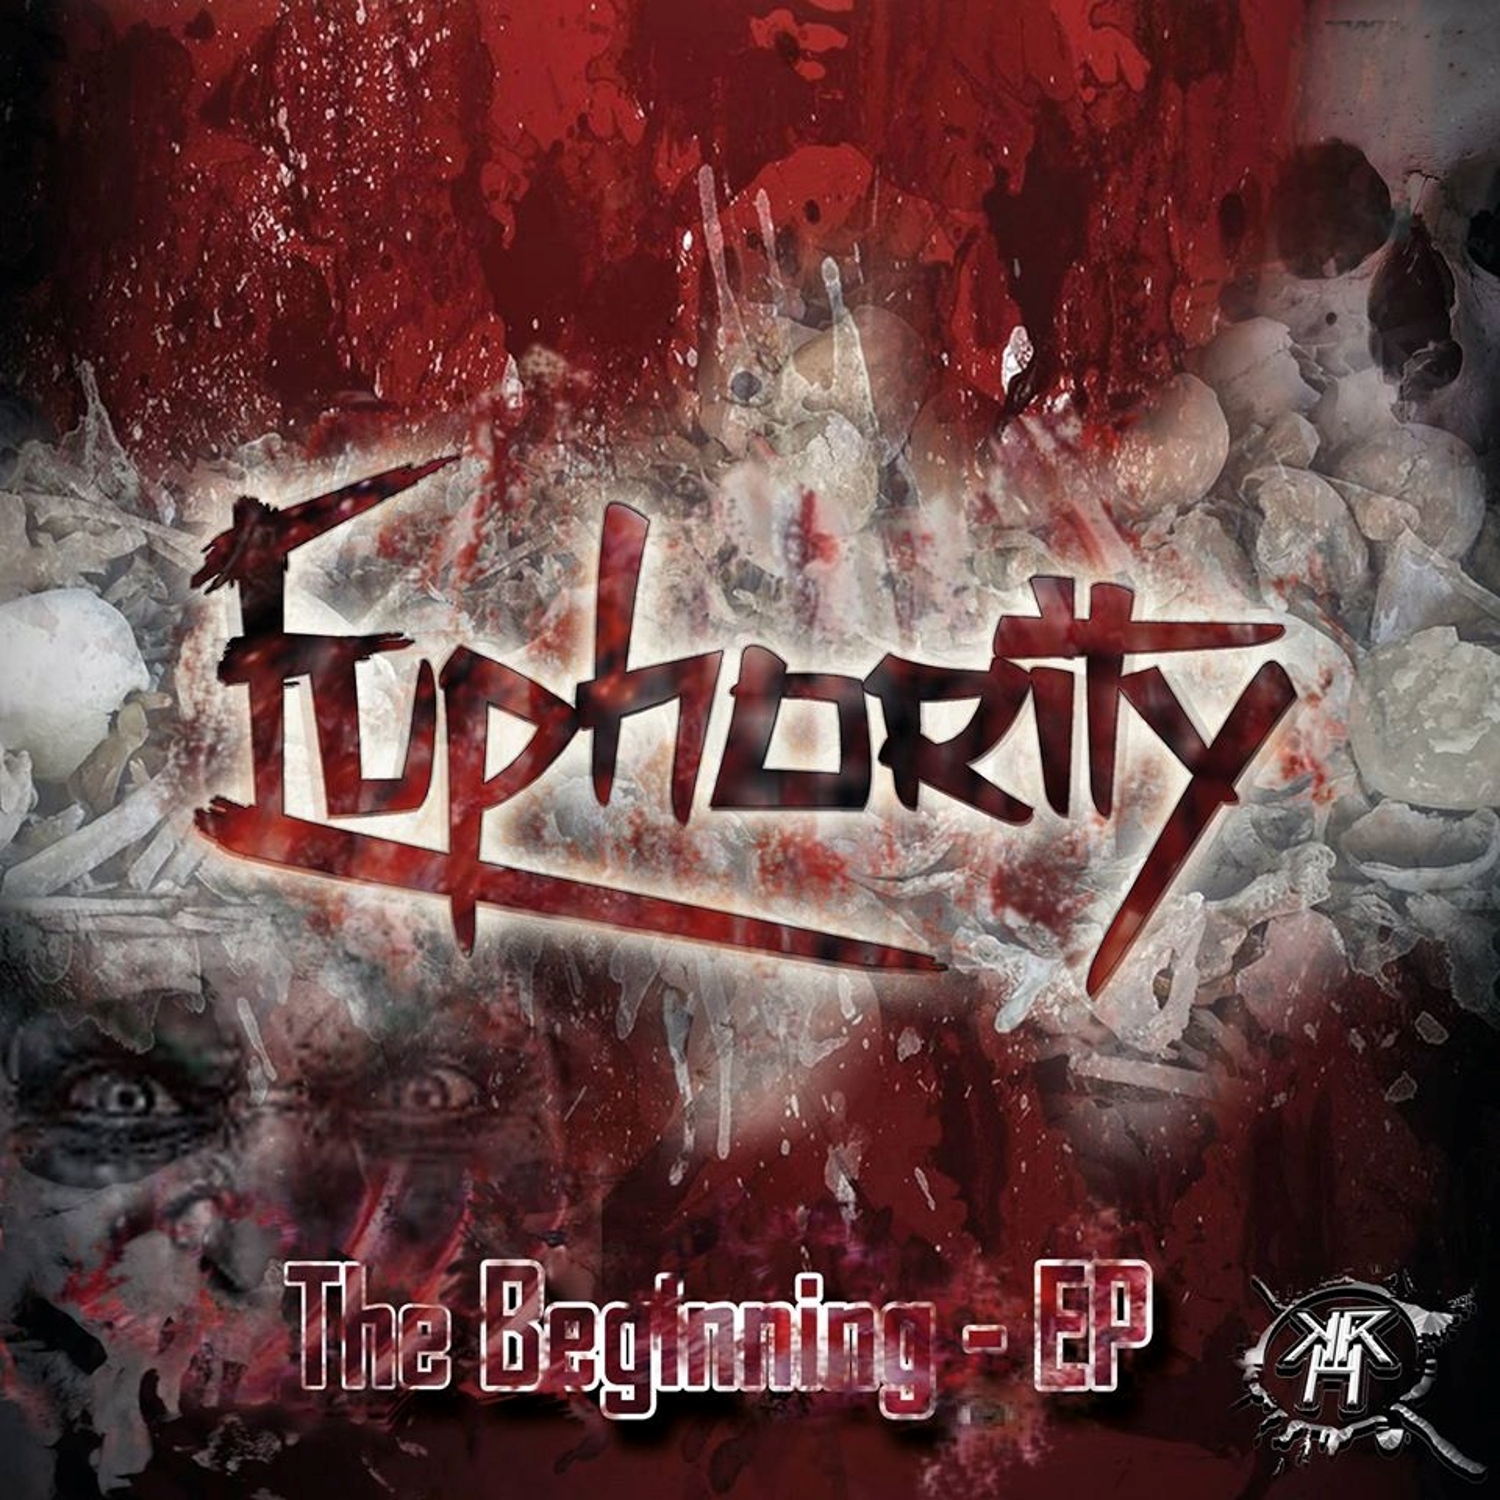 2008 - The beginning [Ep]. Pain Rebirth Cover. Daemon inside